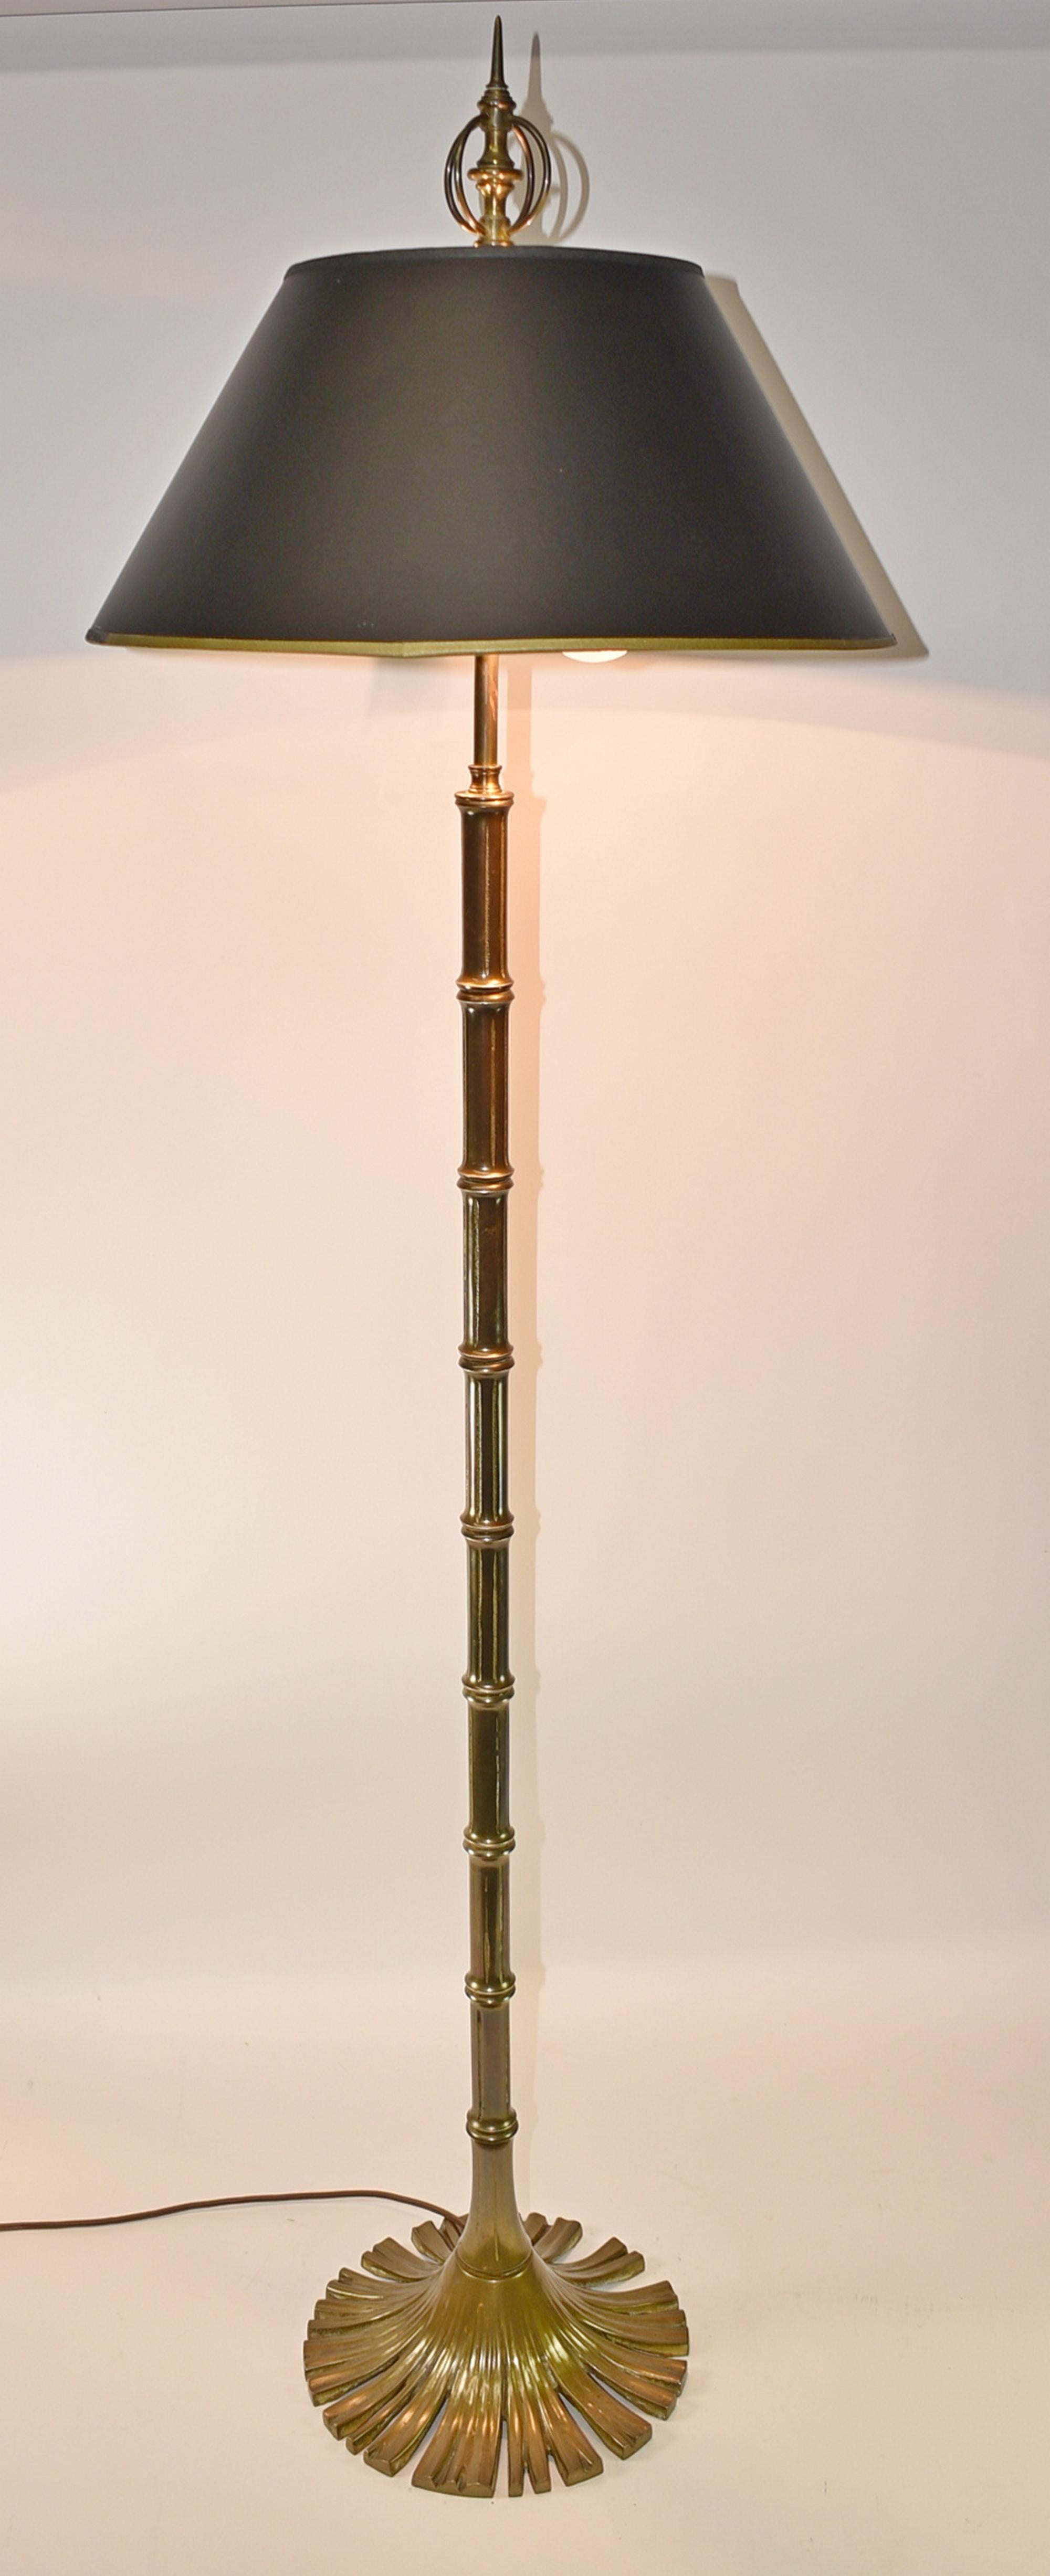 Chapman brass bamboo floor lamp, Circa 1976. Cast brass lamp with bamboo details. Base is fan shaped circle of reeds. Original sockets with tag dated 1976. Two sockets with pull chains. Comes with shade that has black and gold stippled interior.